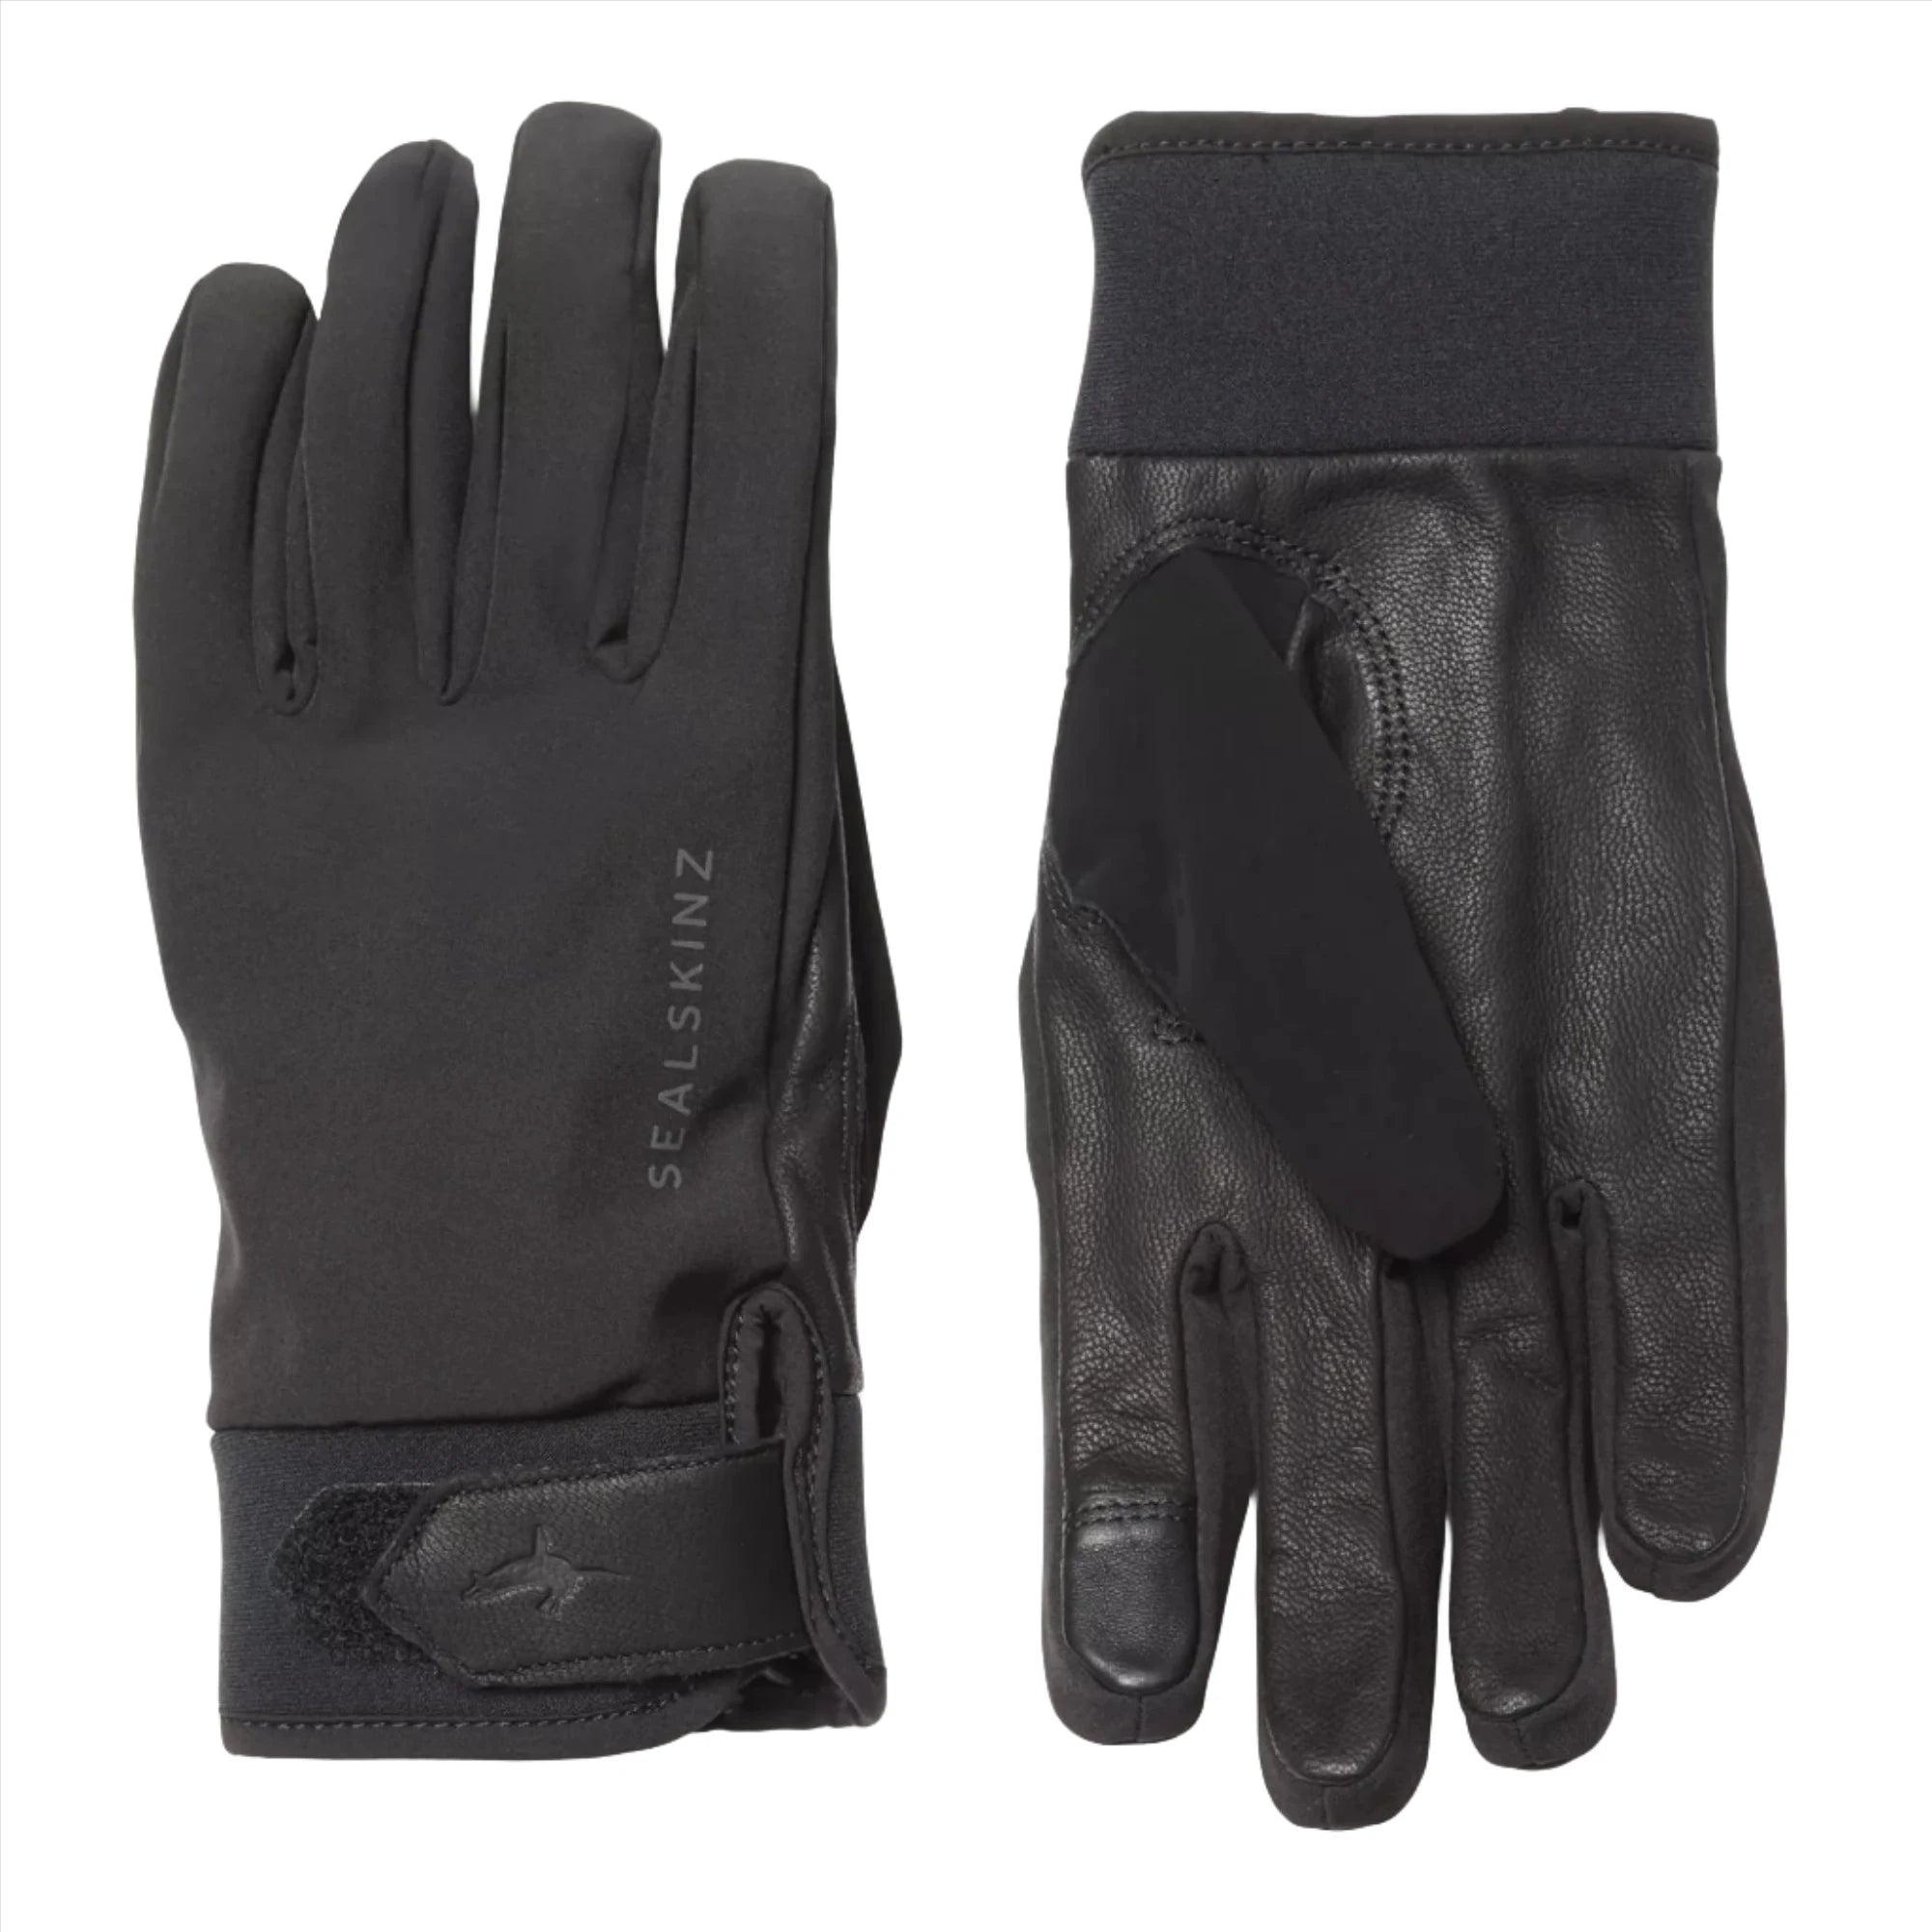 Kelling Waterproof All Weather Insulated Gloves - Black